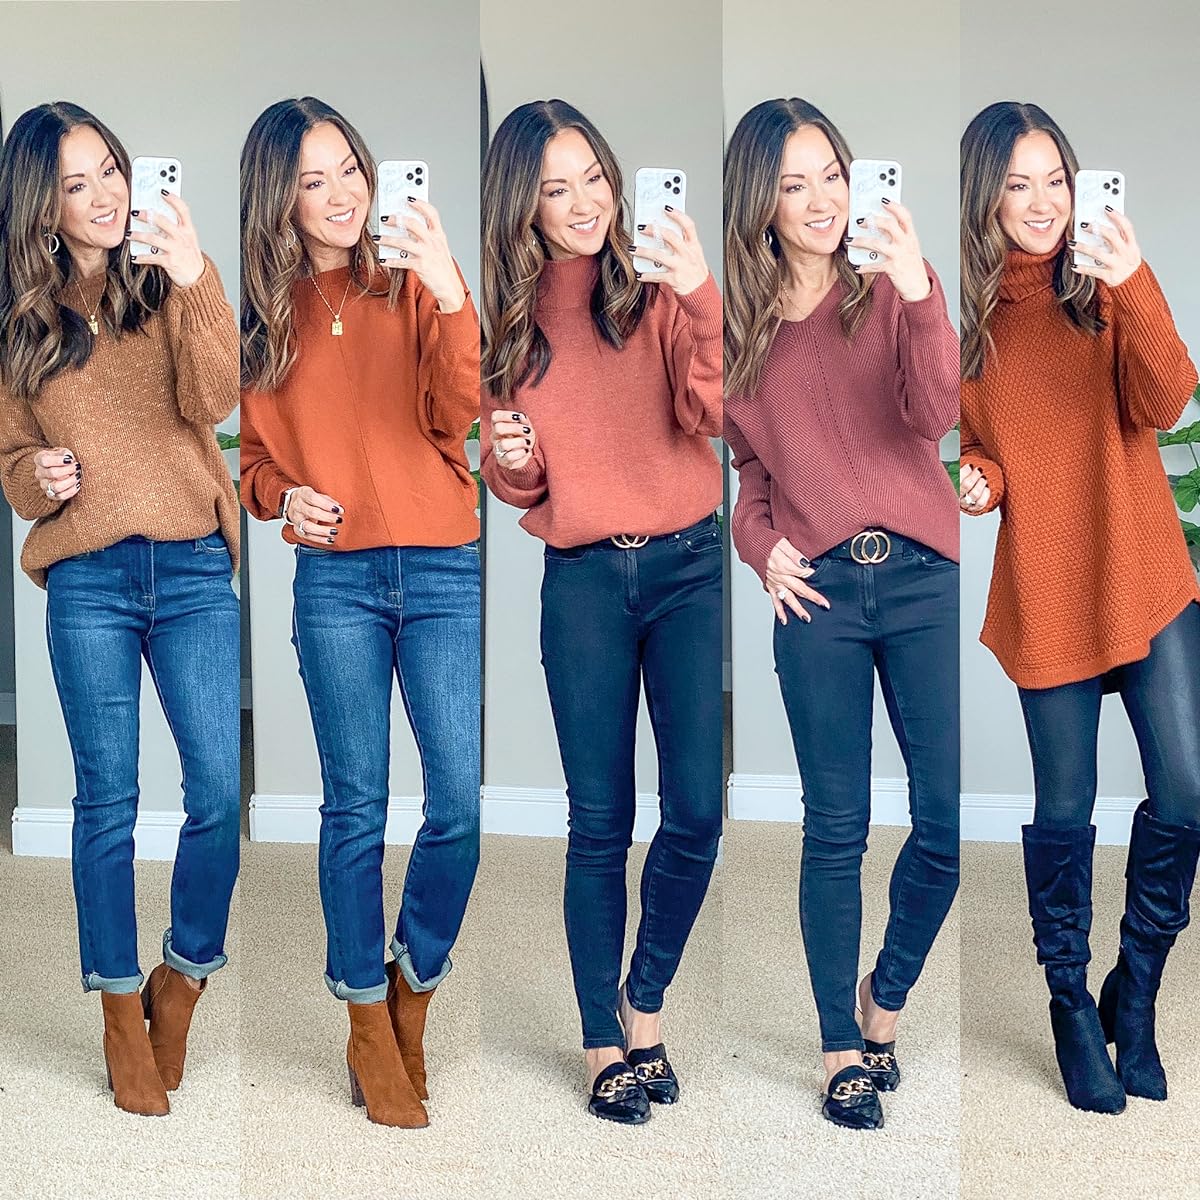 shop last minute thanksgiving outfit ideas and decor | #shop #thanksgiving #thanksgivingoutfit #homedecor #falloutfit #fallfashion #autumn #boots #mules #casual #comfy #sweater #offtheshoulder #turtleneck 